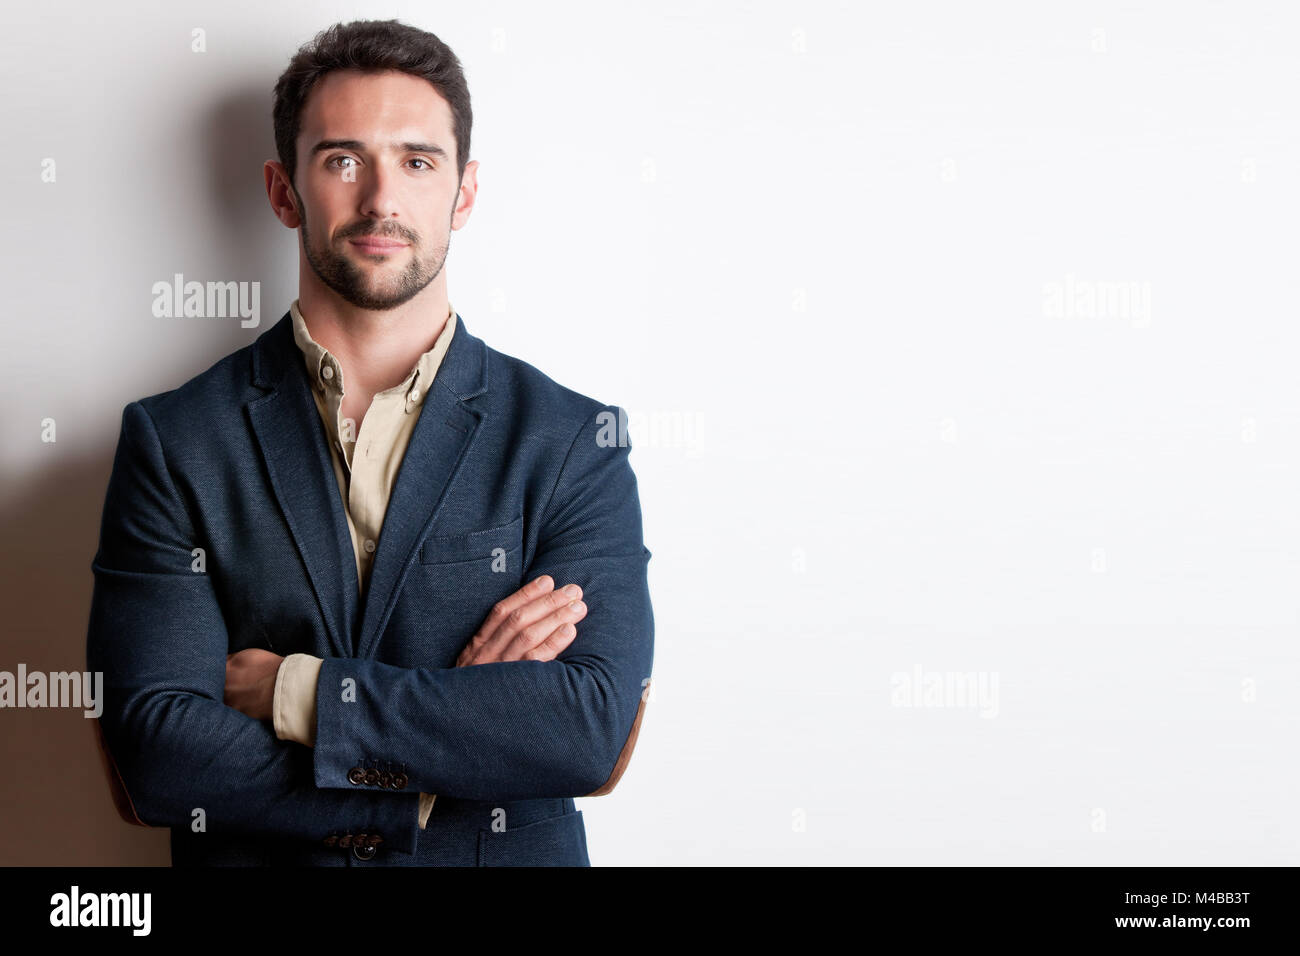 Portrait of a Man With his arms crossed Stock Photo